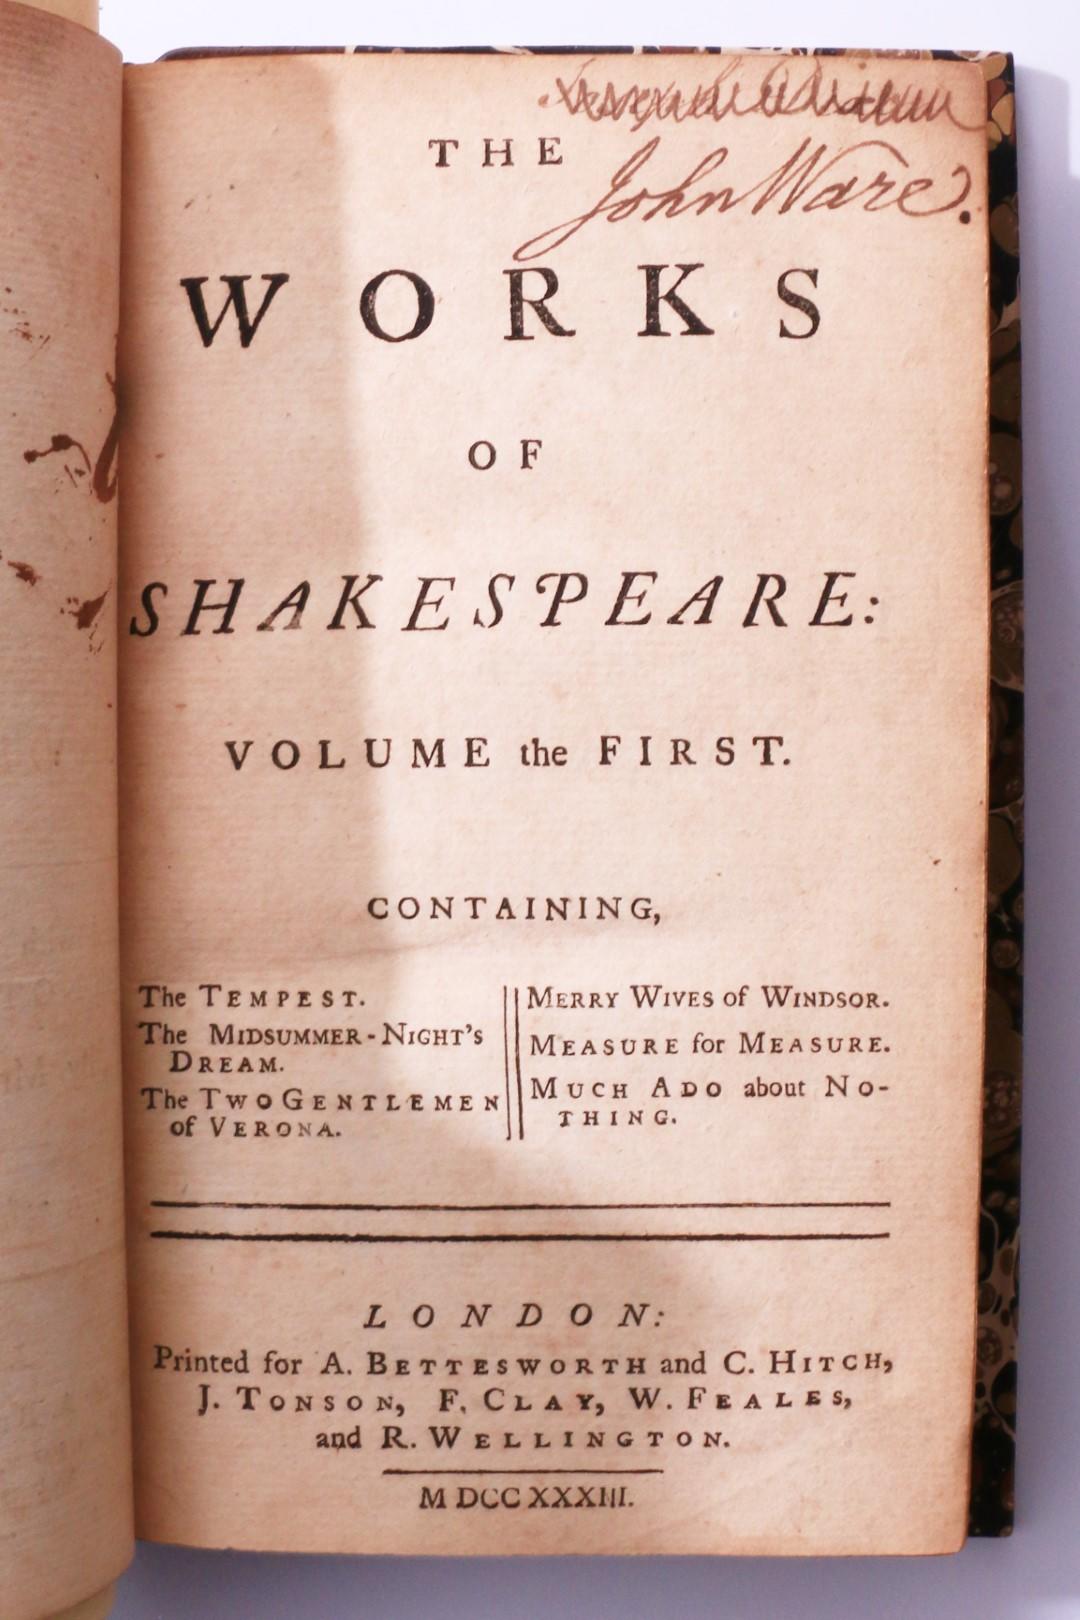 William Shakspeare - The Works of Shakespeare: Collated with the Oldest Copies, and Corrected; With Notes, Explanatory, and Critical: by Mr. Theobald - A. Bettesworth, C. Hitch, J. Tonson, F. Clay, W. Feales and R. Wellington, 1733, First Thus.